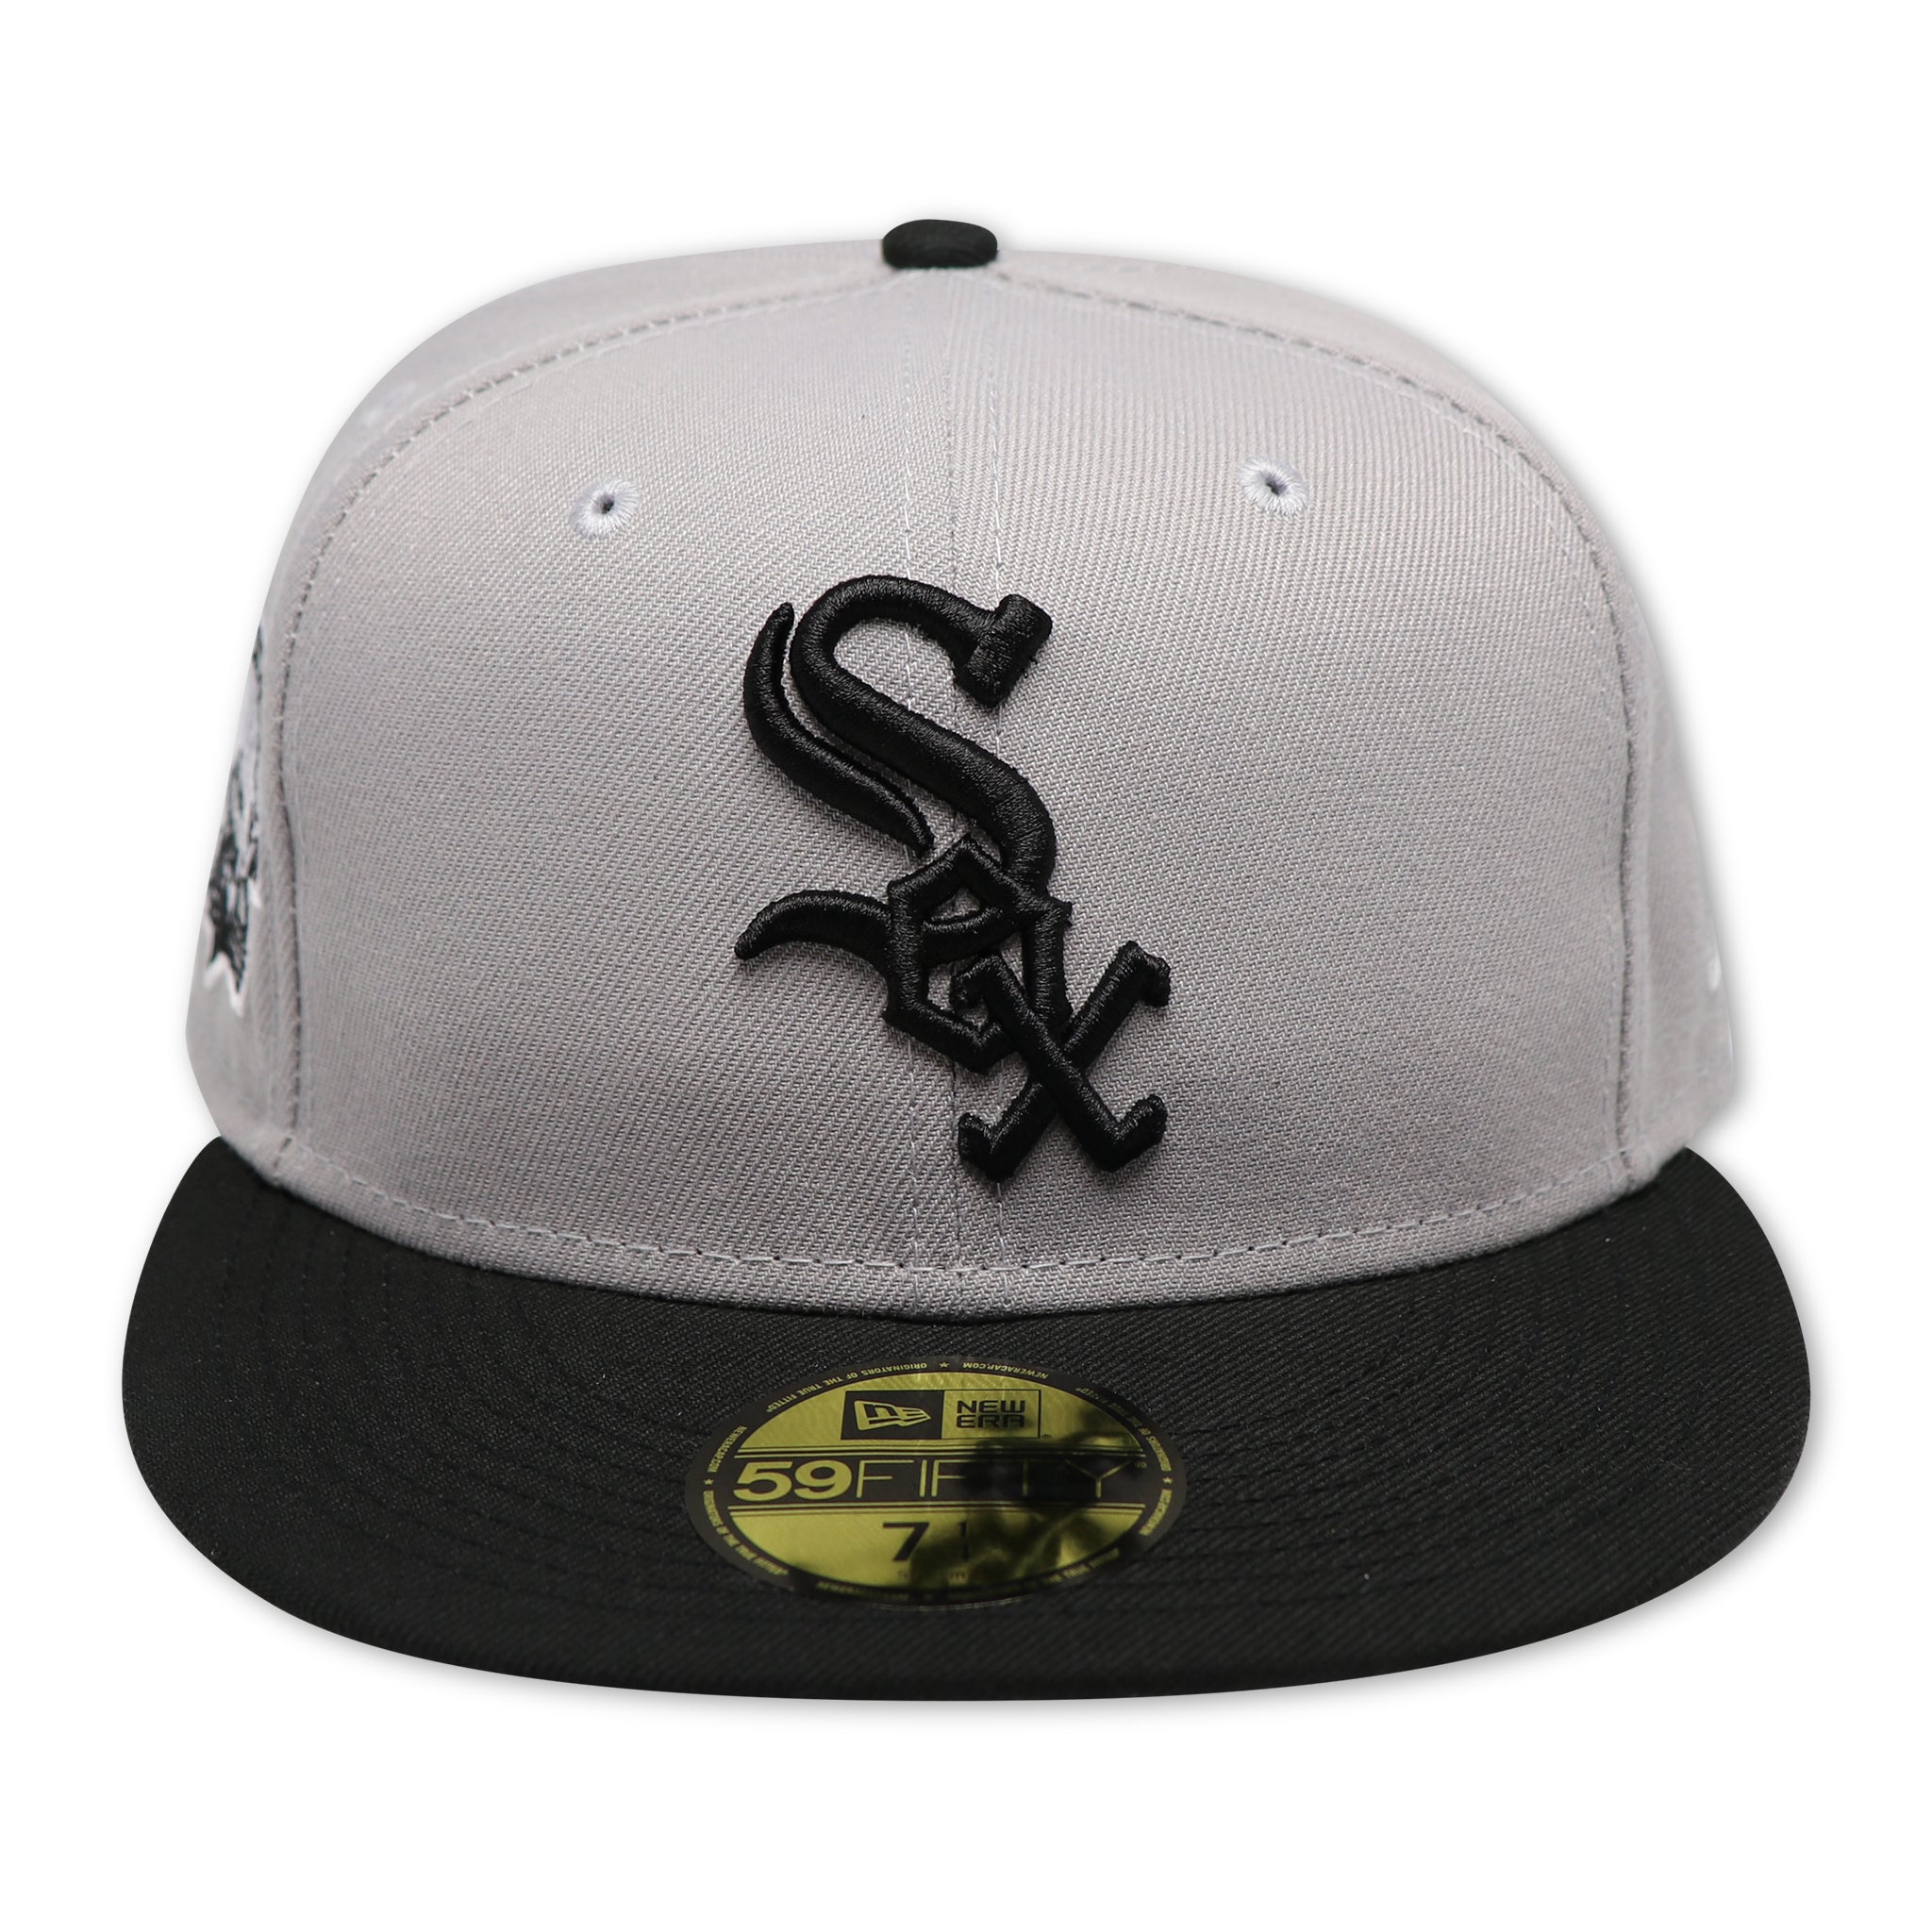 CHICAGO WHITESOX "ROAD" (COMISKEY PARK) NEW ERA 59FIFTY FITTED ( SILVER UNDER VISOR)